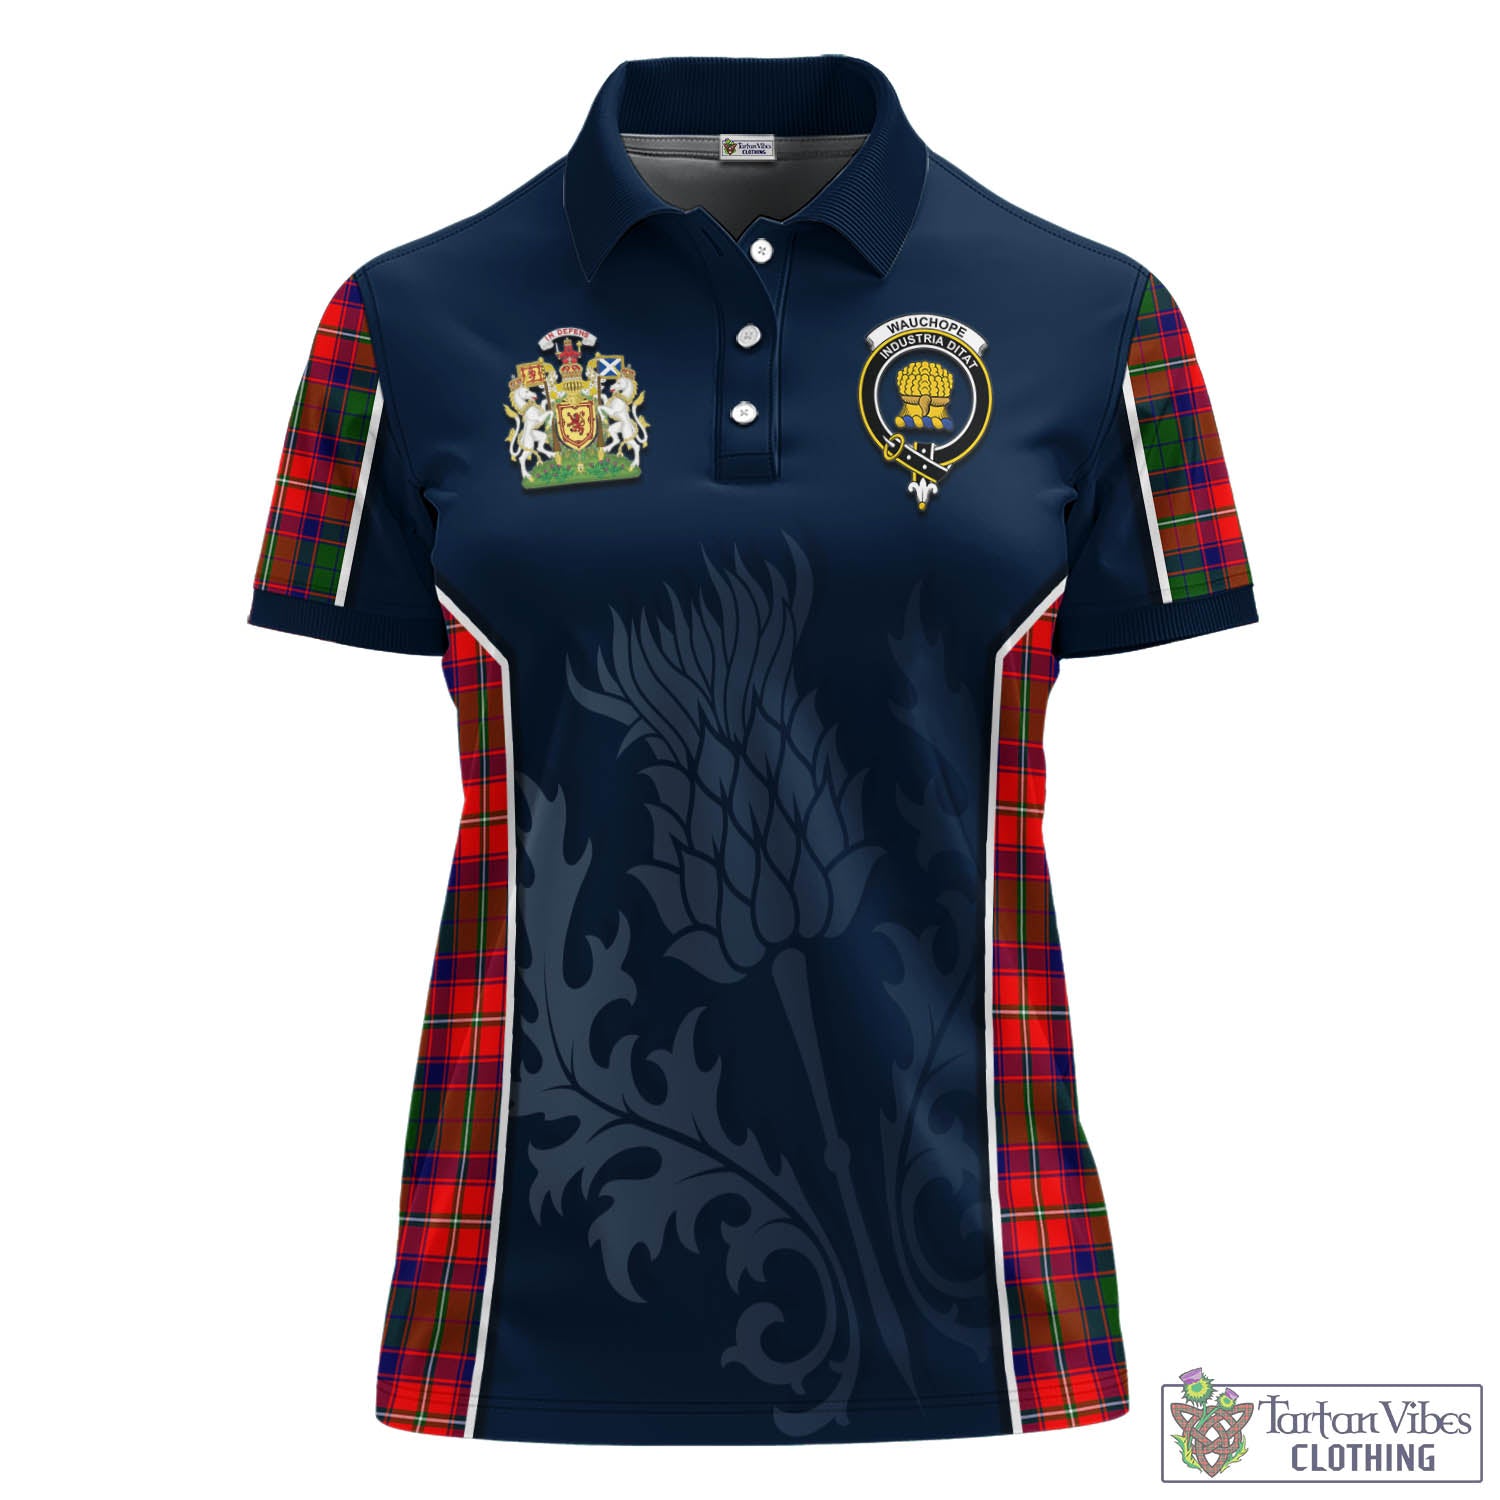 Tartan Vibes Clothing Wauchope Tartan Women's Polo Shirt with Family Crest and Scottish Thistle Vibes Sport Style